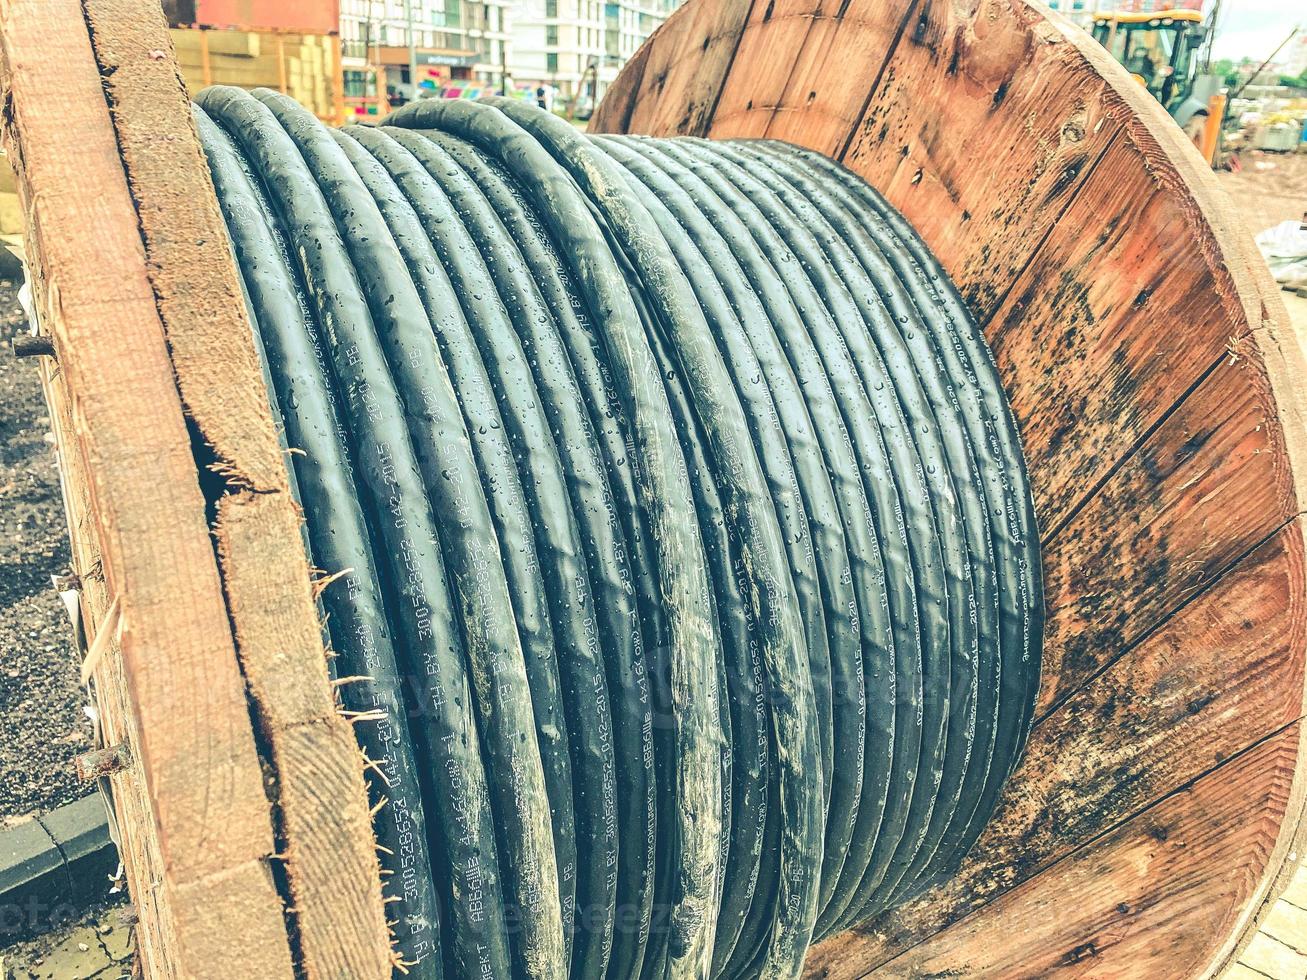 a large, wooden reel for winding a power line. dense, black cable for laying communications in the microdistrict. construction material photo